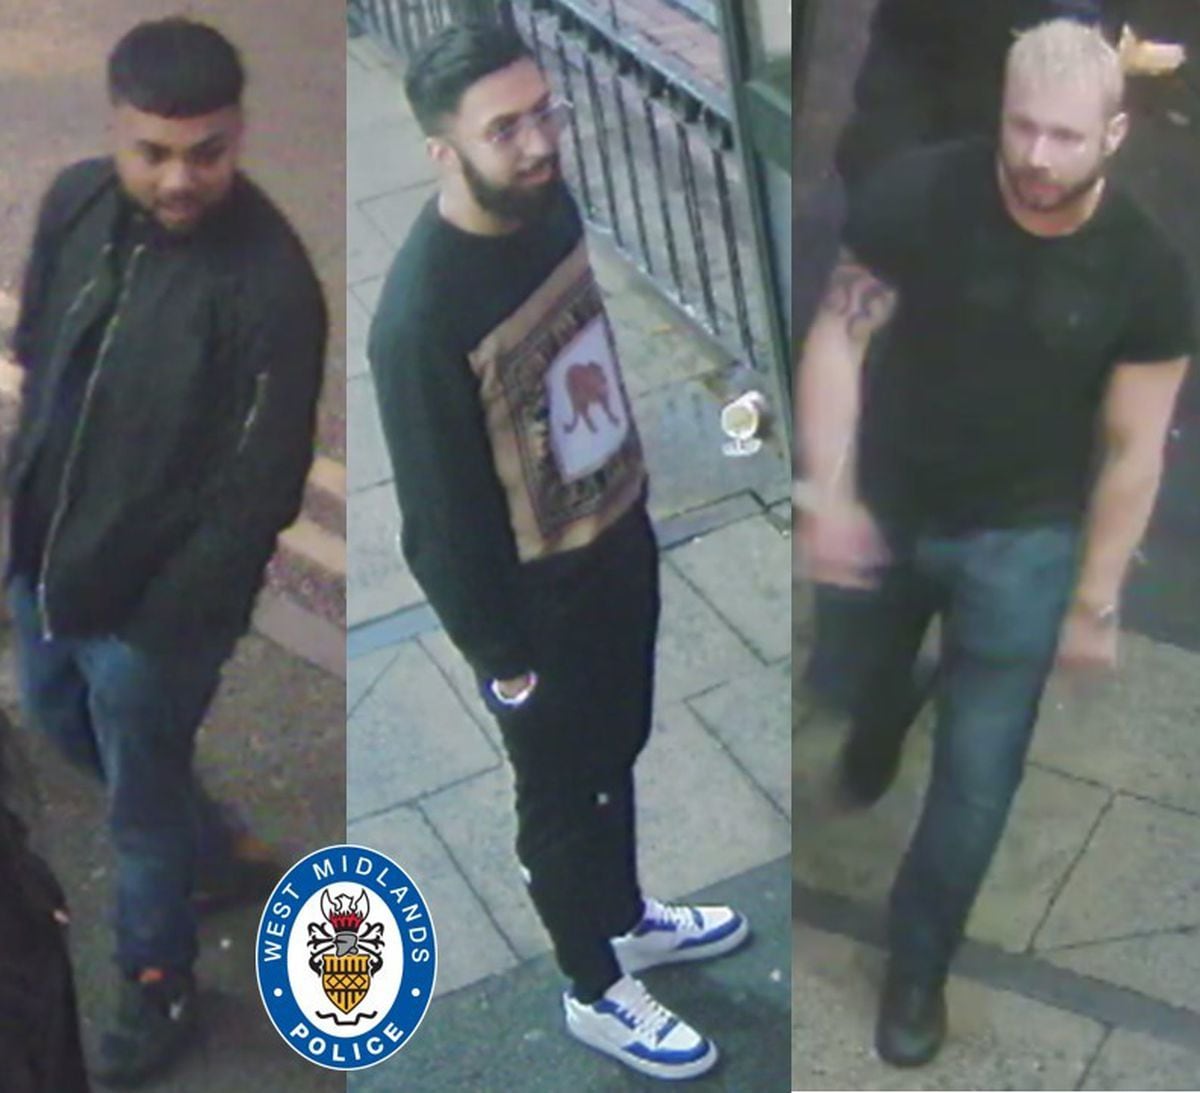 Police want to speak to these men after an assault in Wolverhampton